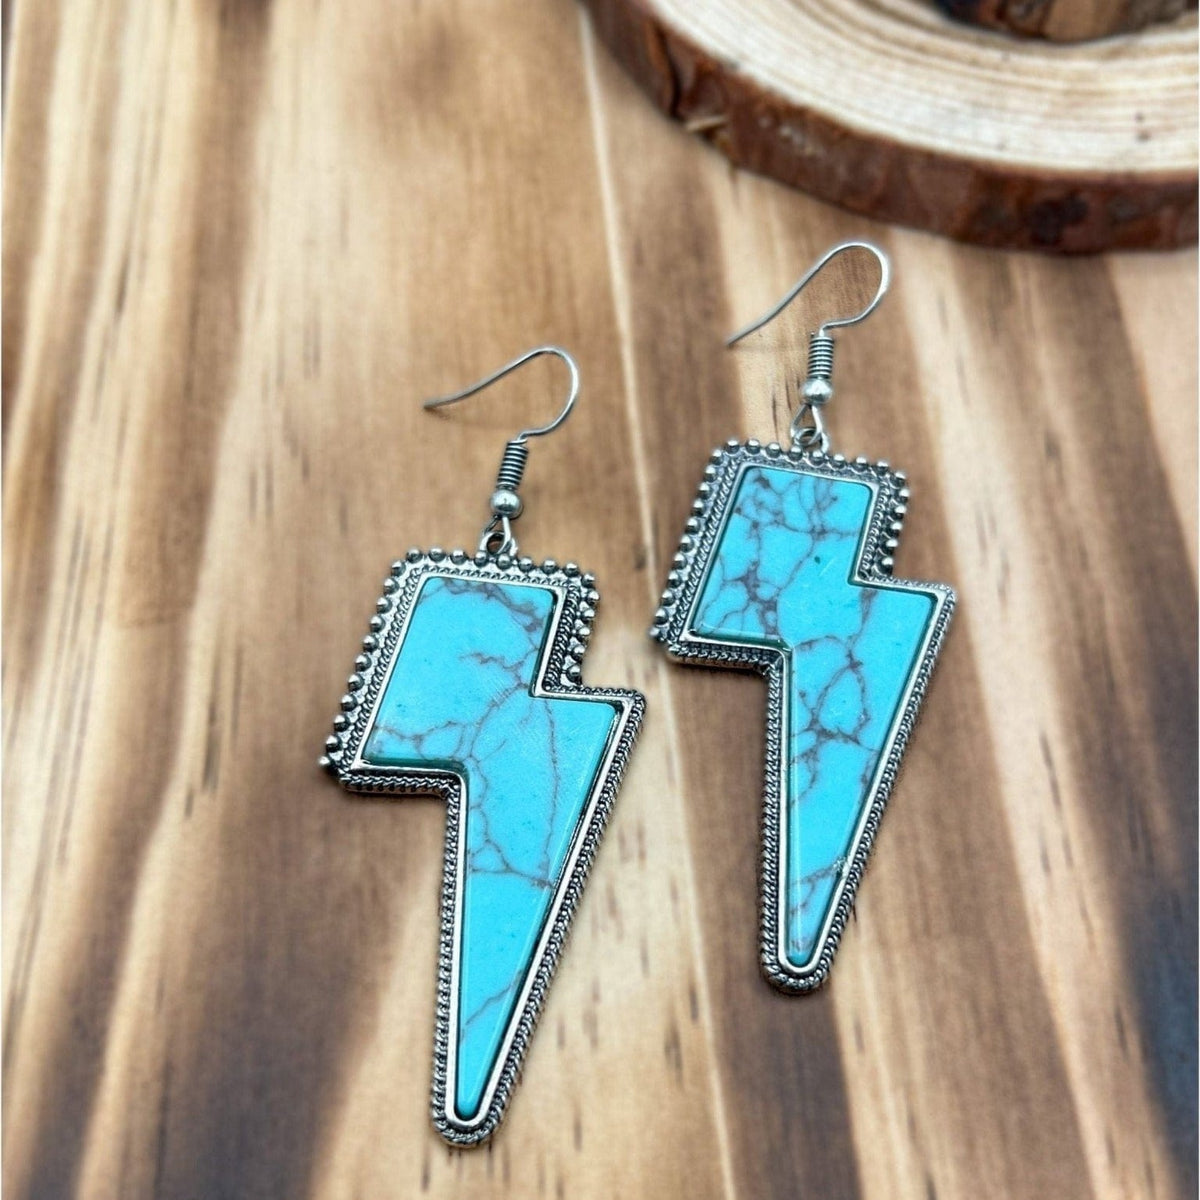 And the Thunder Rolls Turquoise & Silver Lightning Bolt Earrings Earrings TheFringeCultureCollective